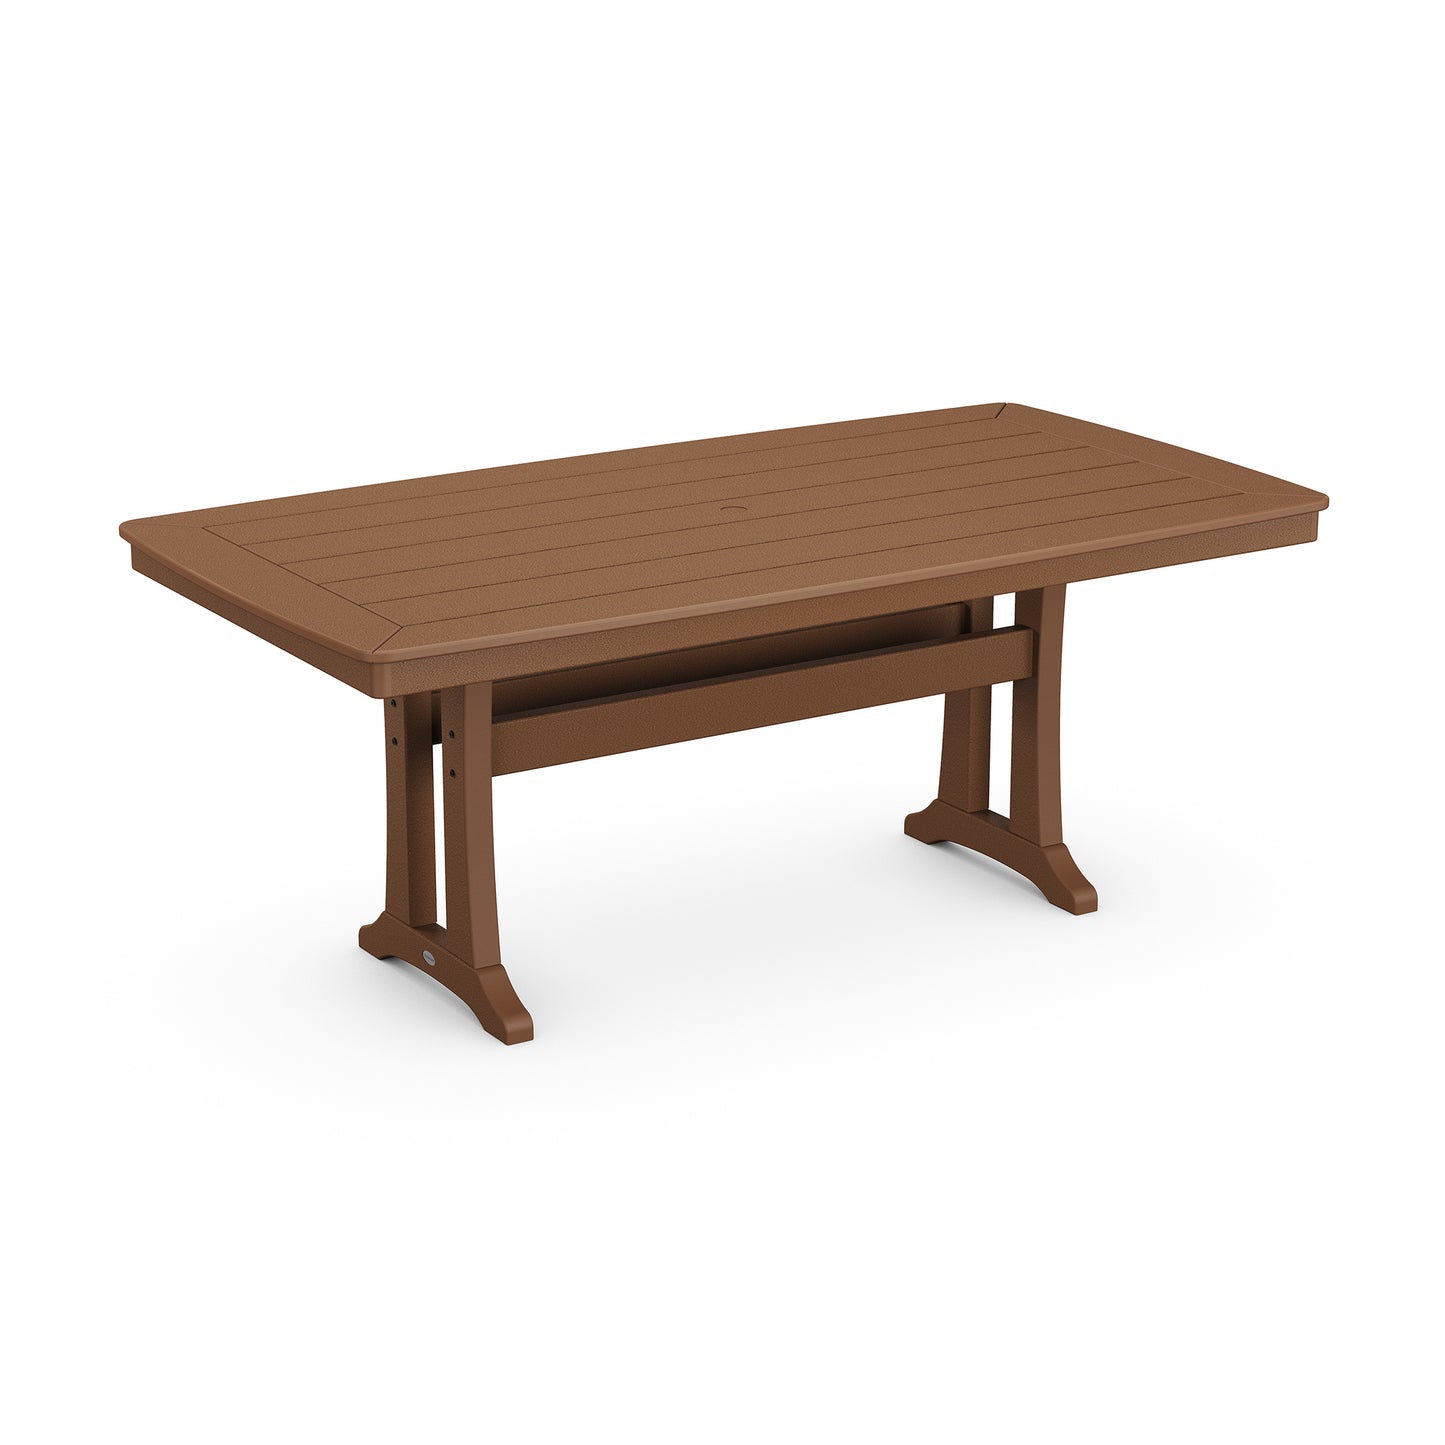 A rectangular POLYWOOD Nautical Trestle 38" x 73" outdoor dining table made of brown synthetic wood with sturdy legs, depicted on a plain white background.